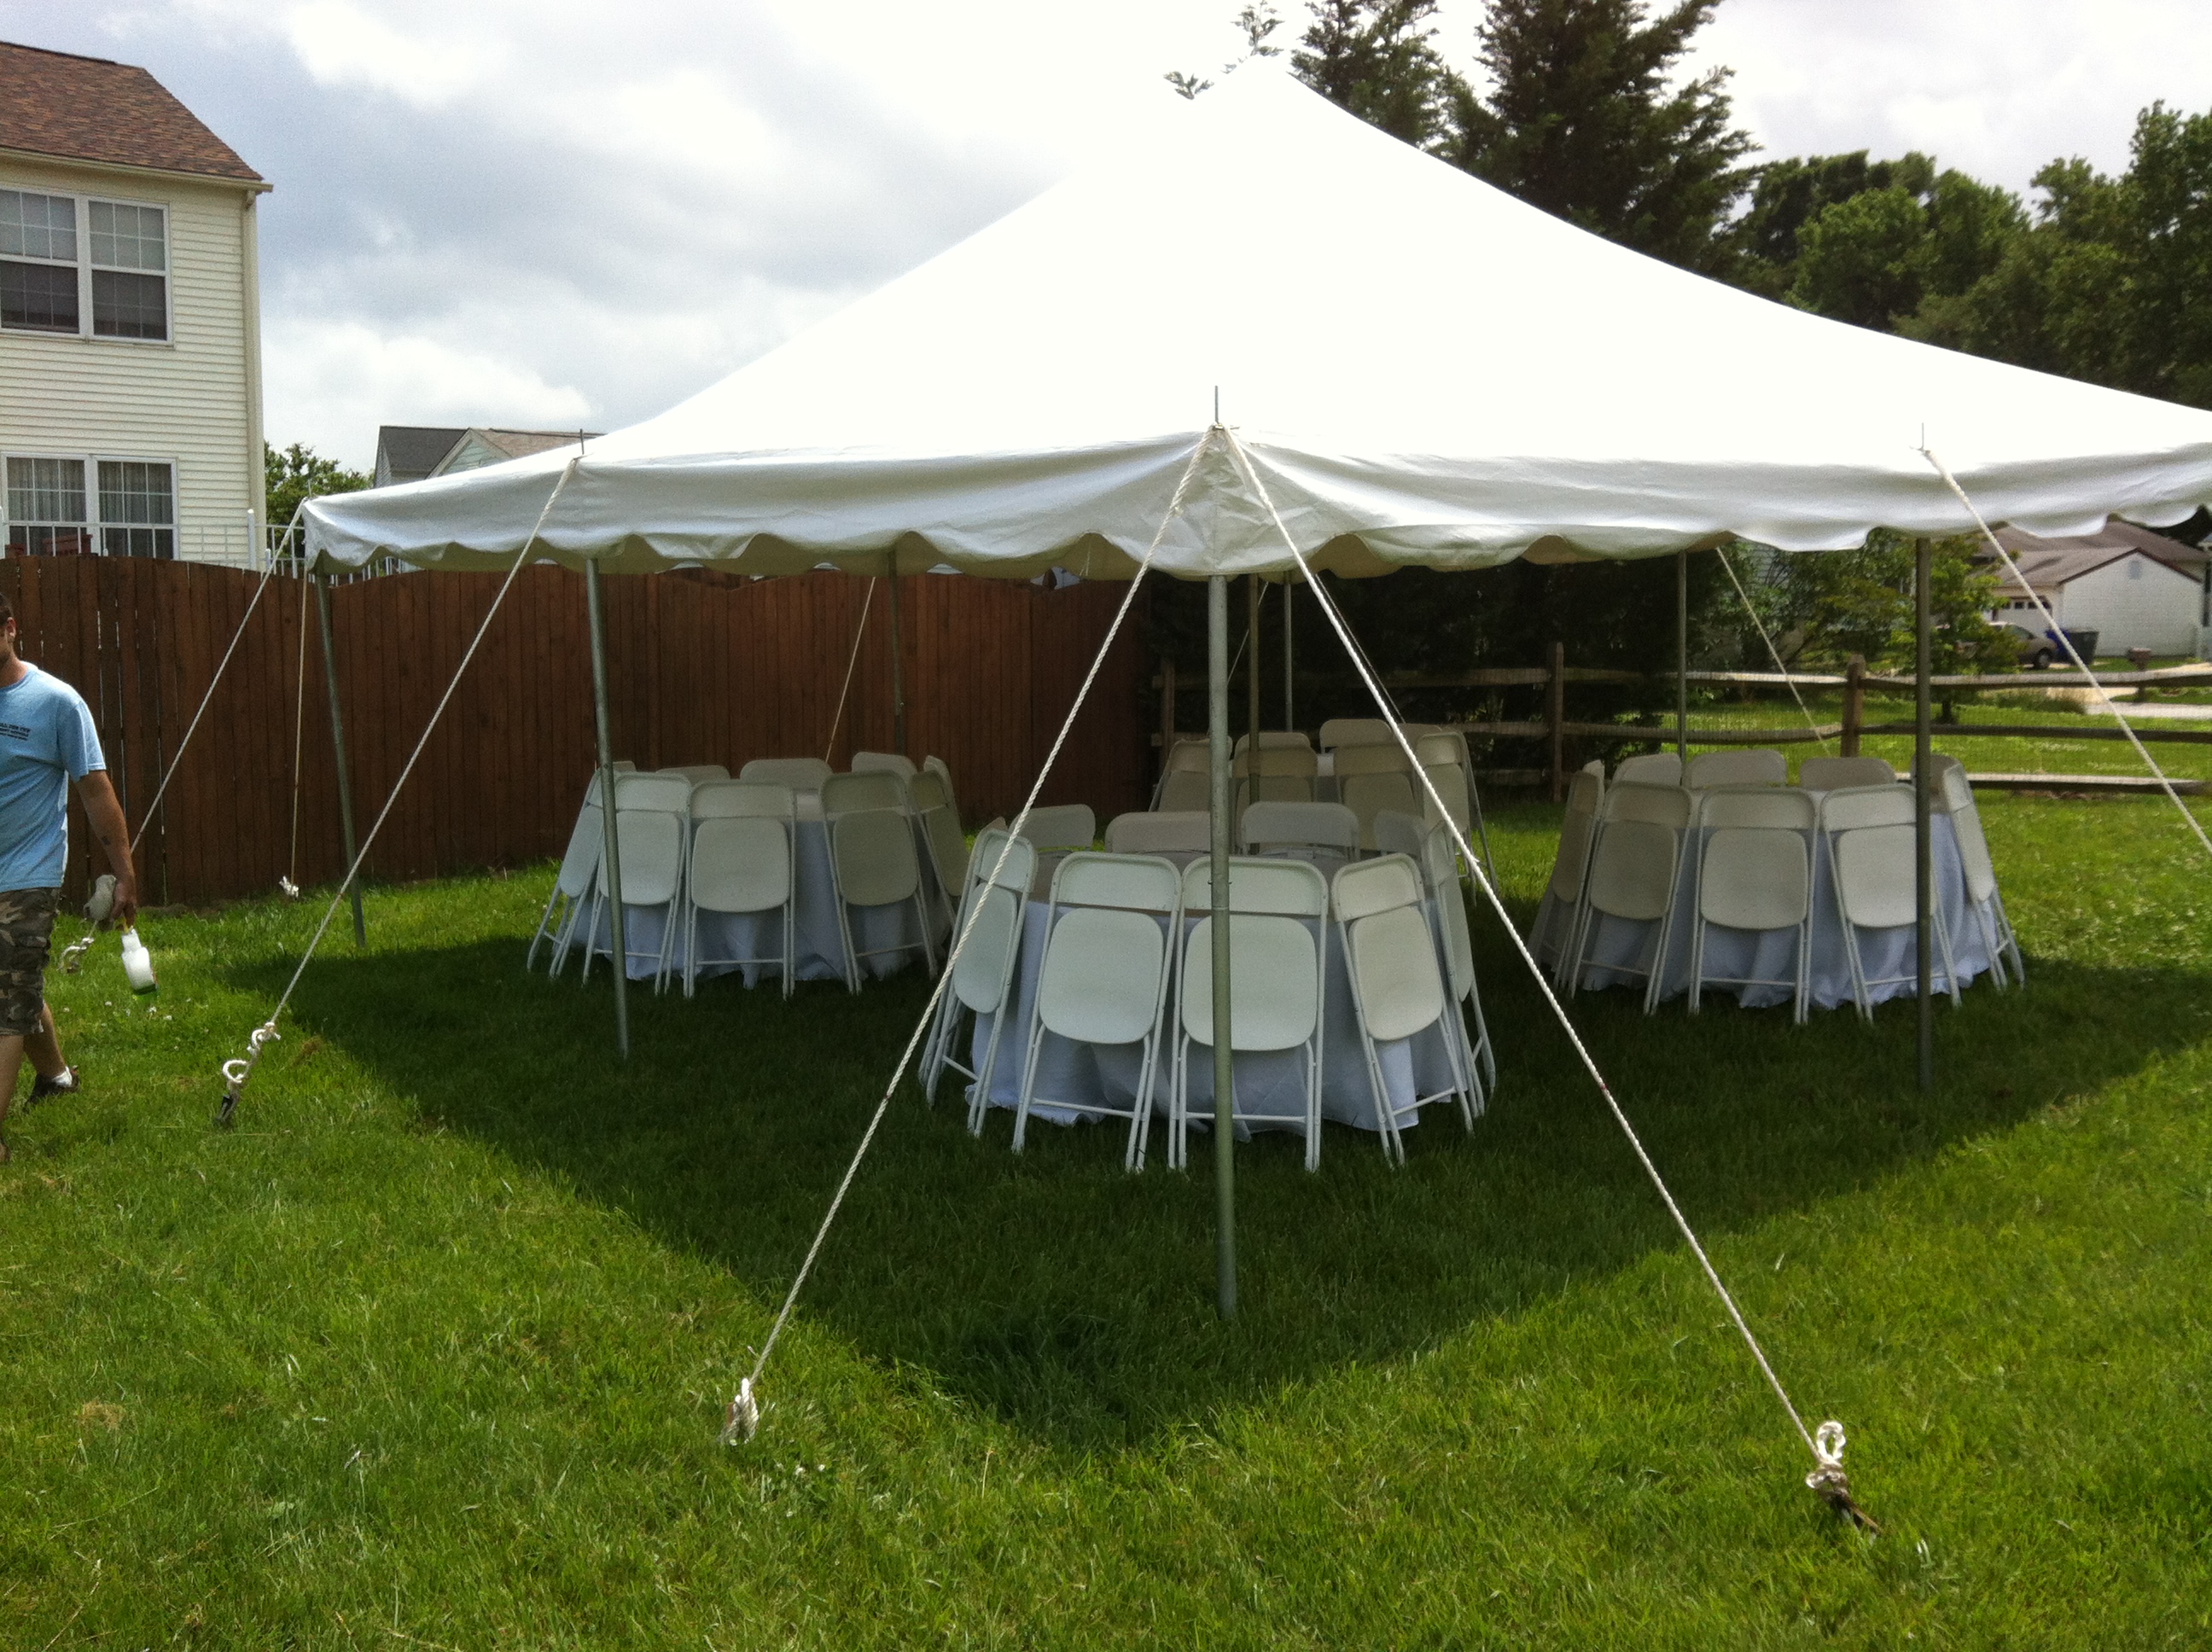 20 by 20 party tent